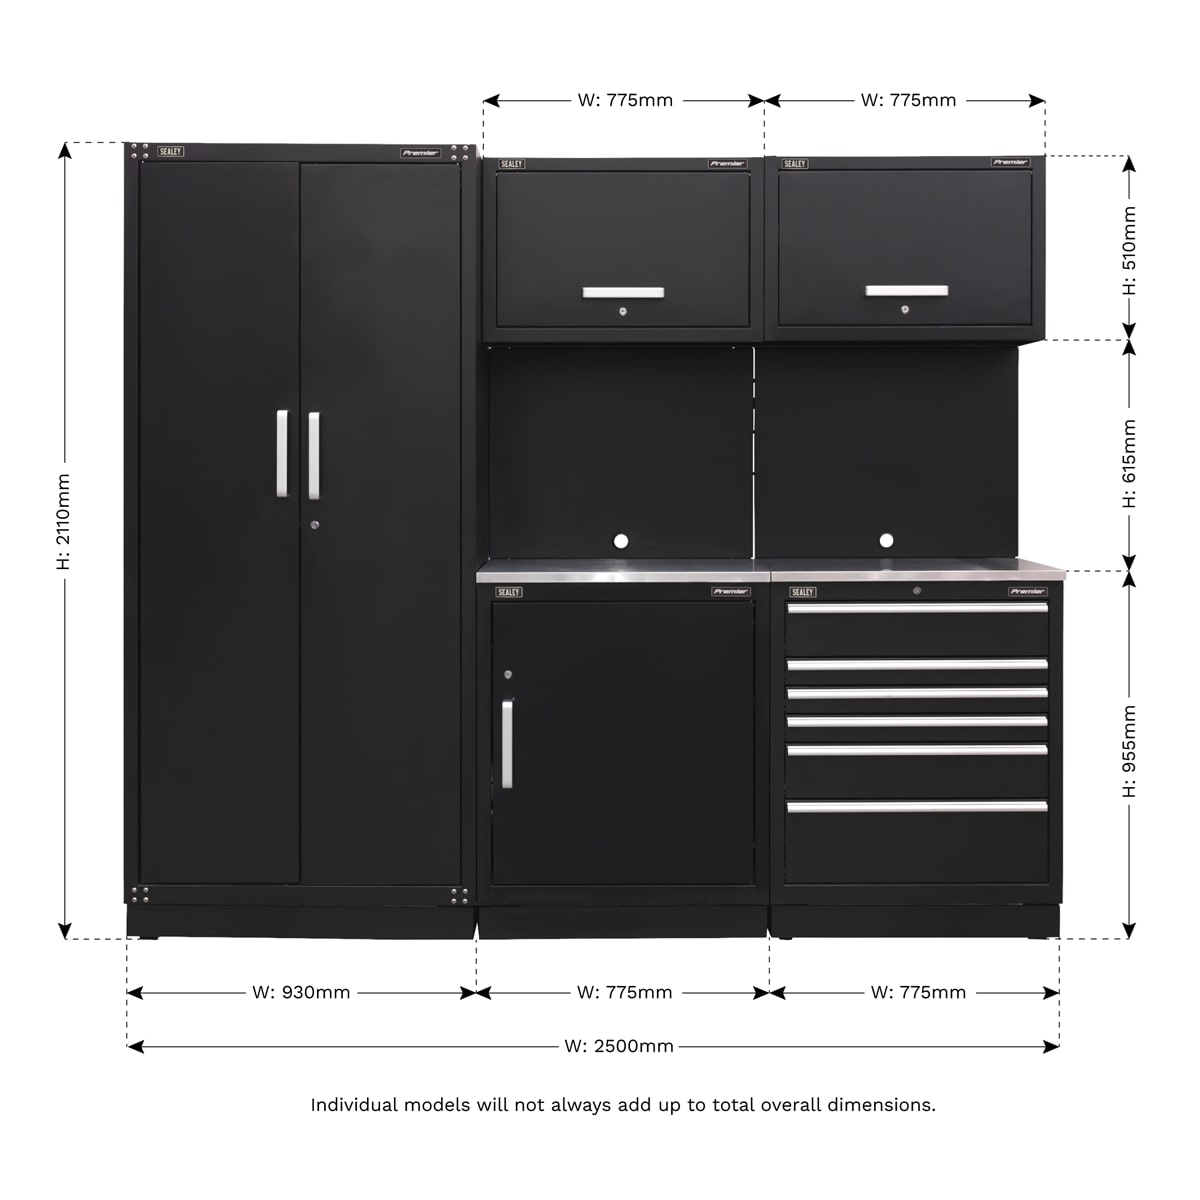 Sealey APMSCOMBO1SS Modular Storage System Combo - Stainless Steel Worktop